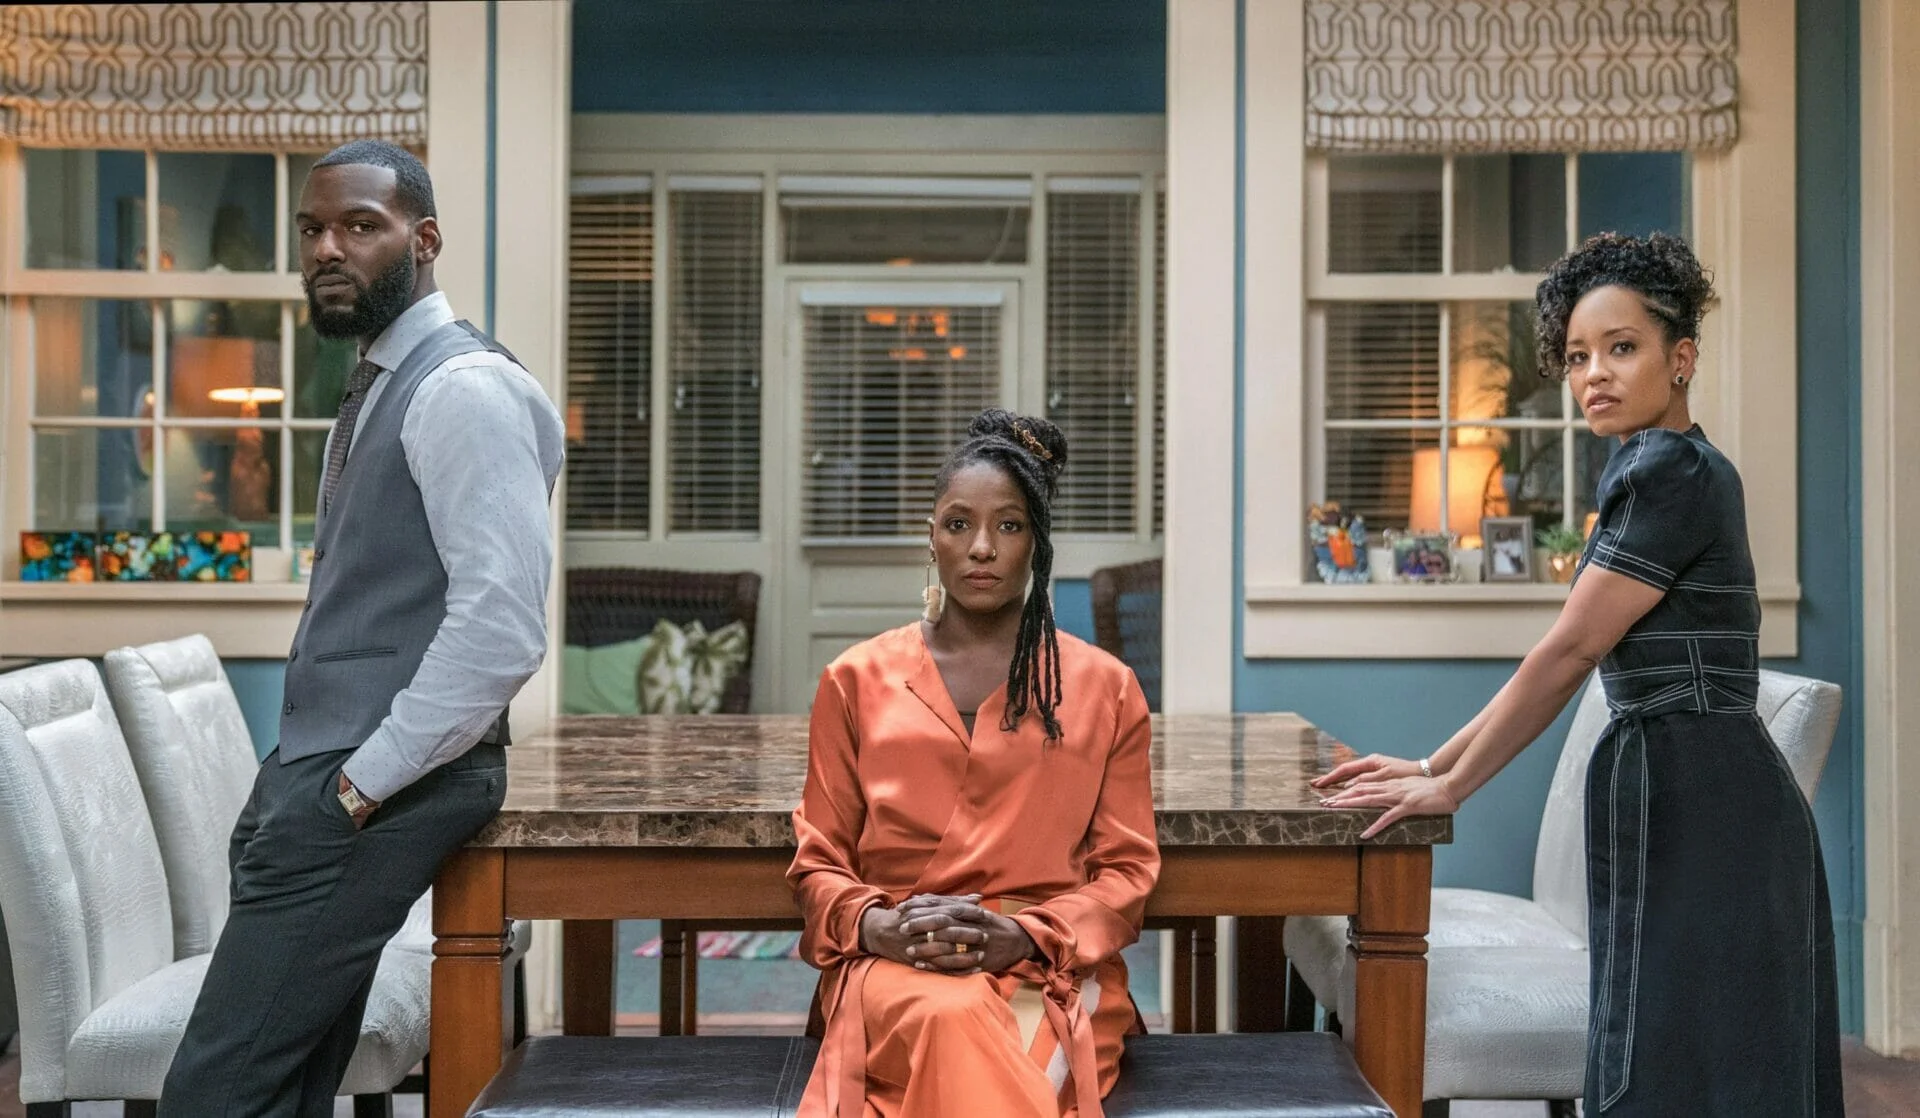 Queen Sugar is a portrayal of oppression